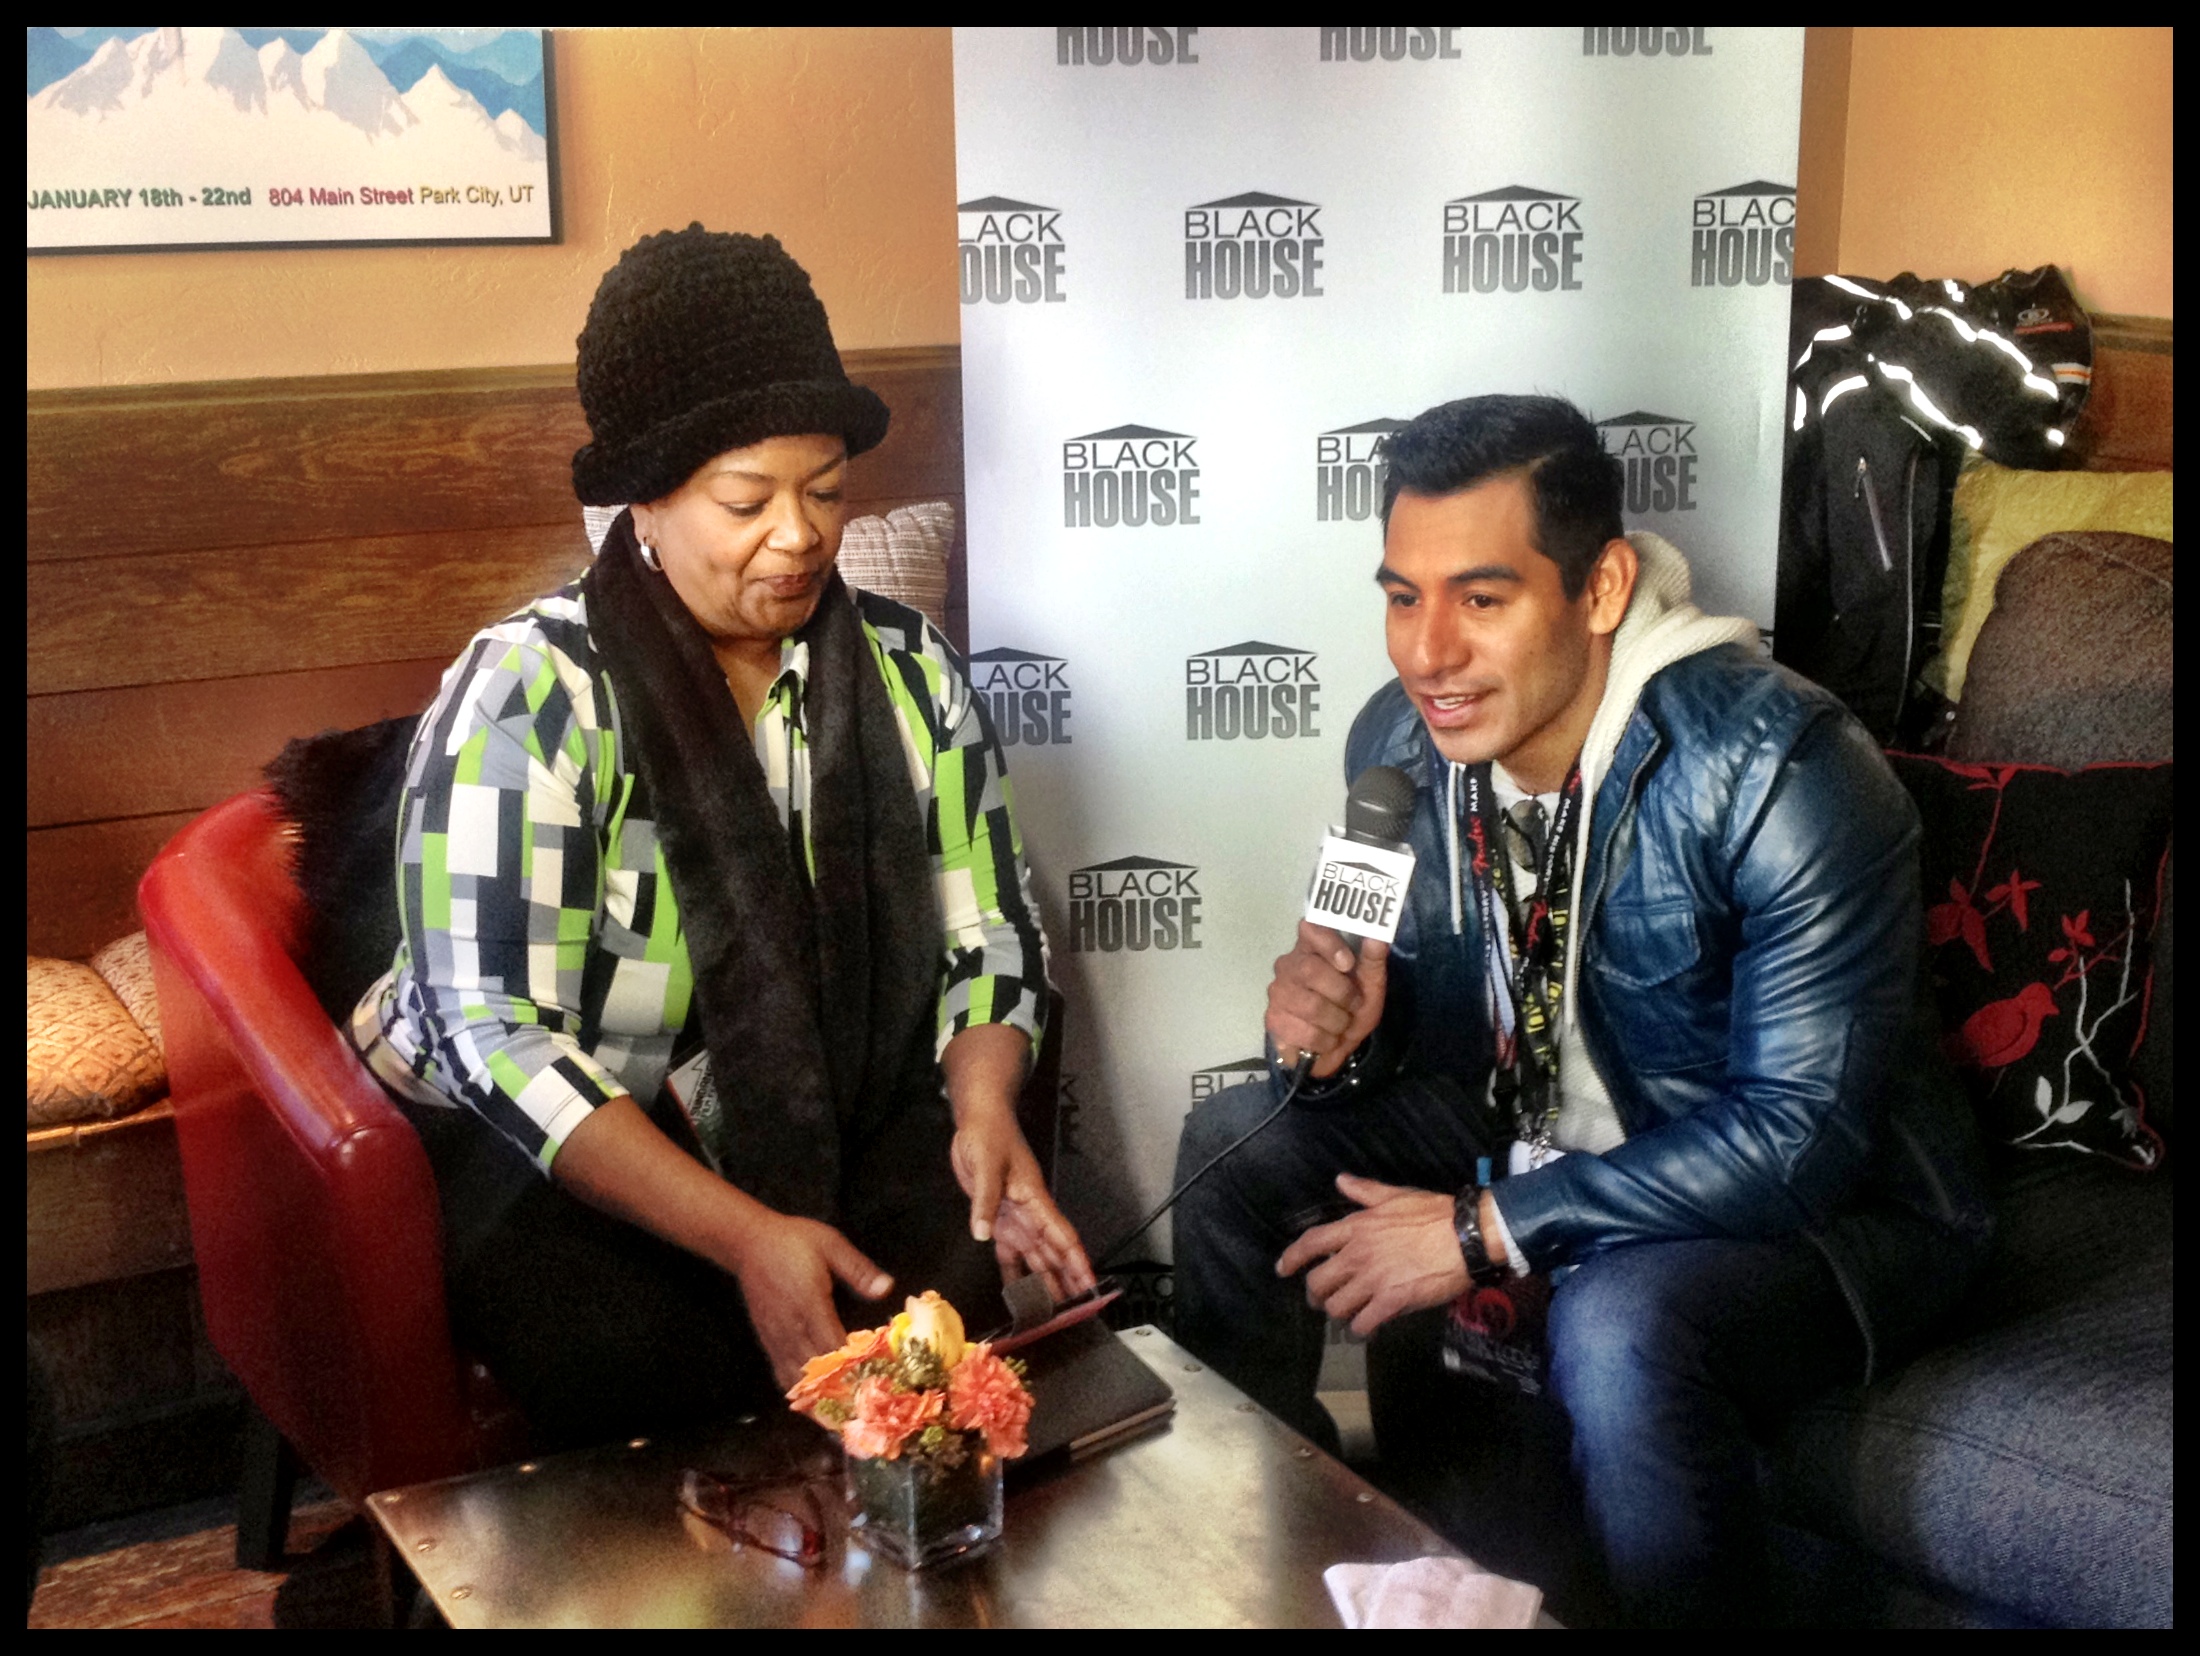 Eloy Mendez supporting The BlackHouse Foundation at the 2013 Sundance Film Festival.